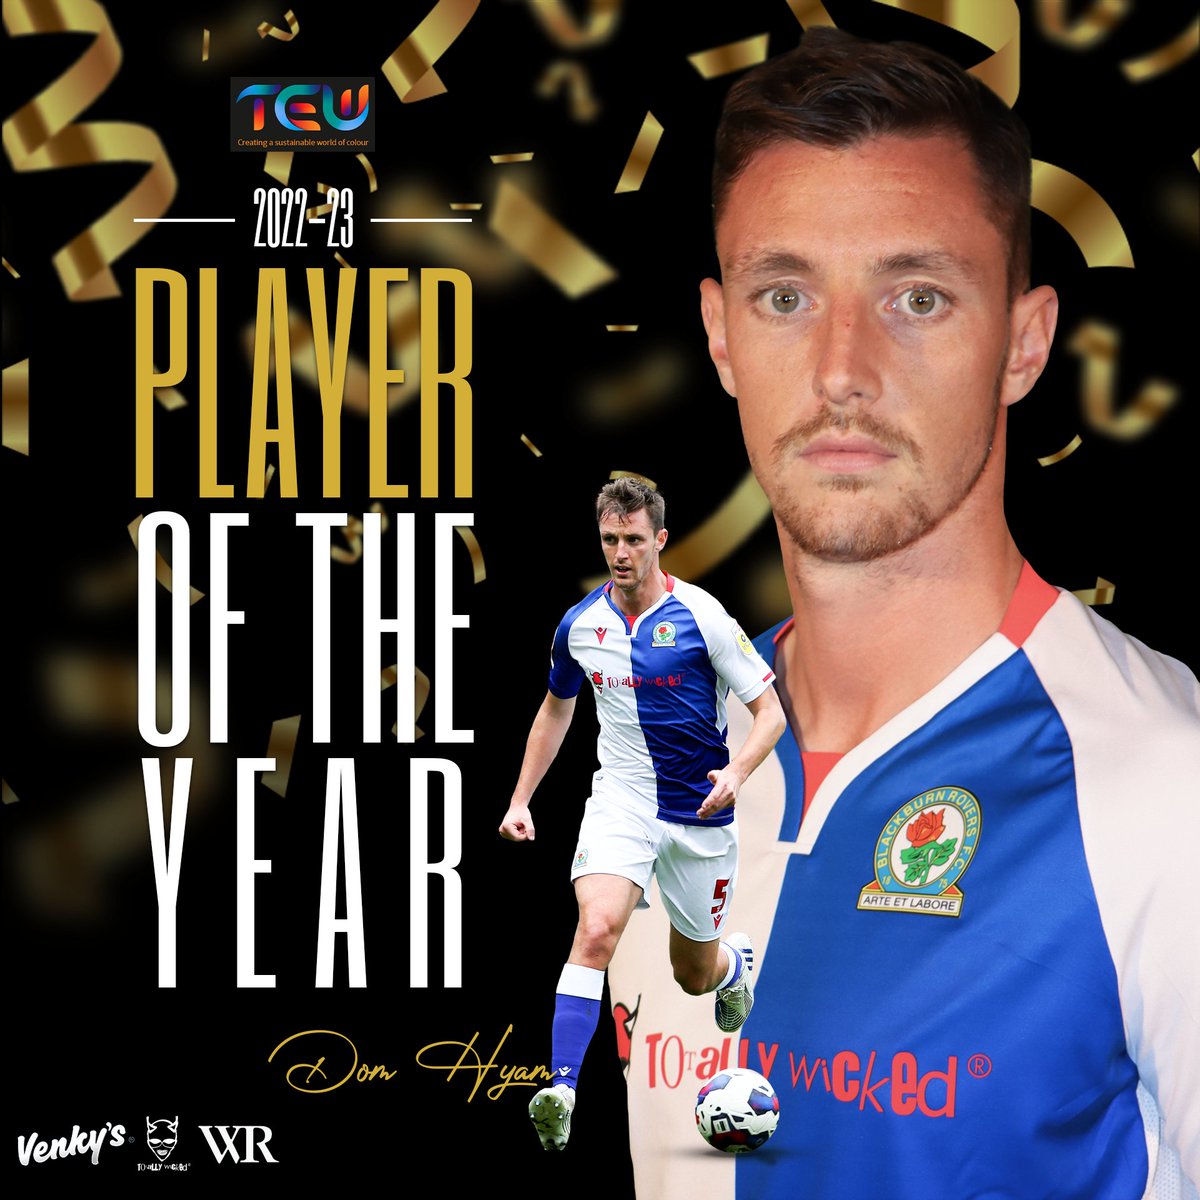 🏆 Calmness, consistency and class from day one. His Dominant displays in defence immediately endeared him to #Rovers faithful, who voted him as our 2022-23 Player of the Year! Congratulations, @DomHyam_95! 👏 🔵⚪️